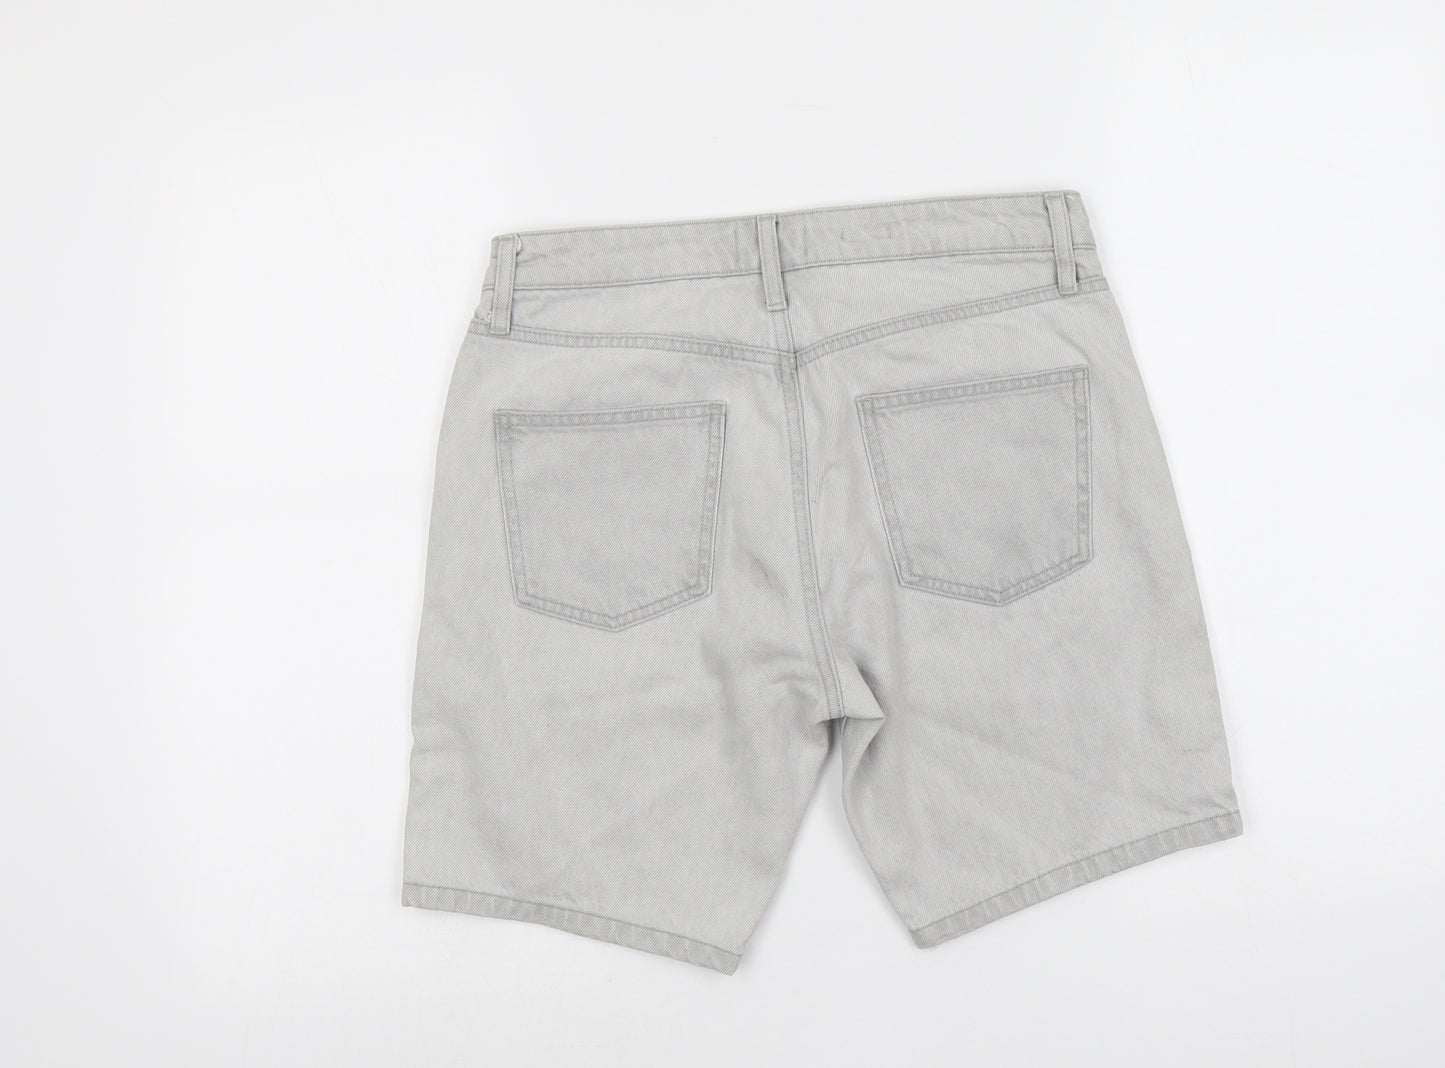 Topman Mens Grey Cotton Chino Shorts Size 30 in L8 in Regular Button